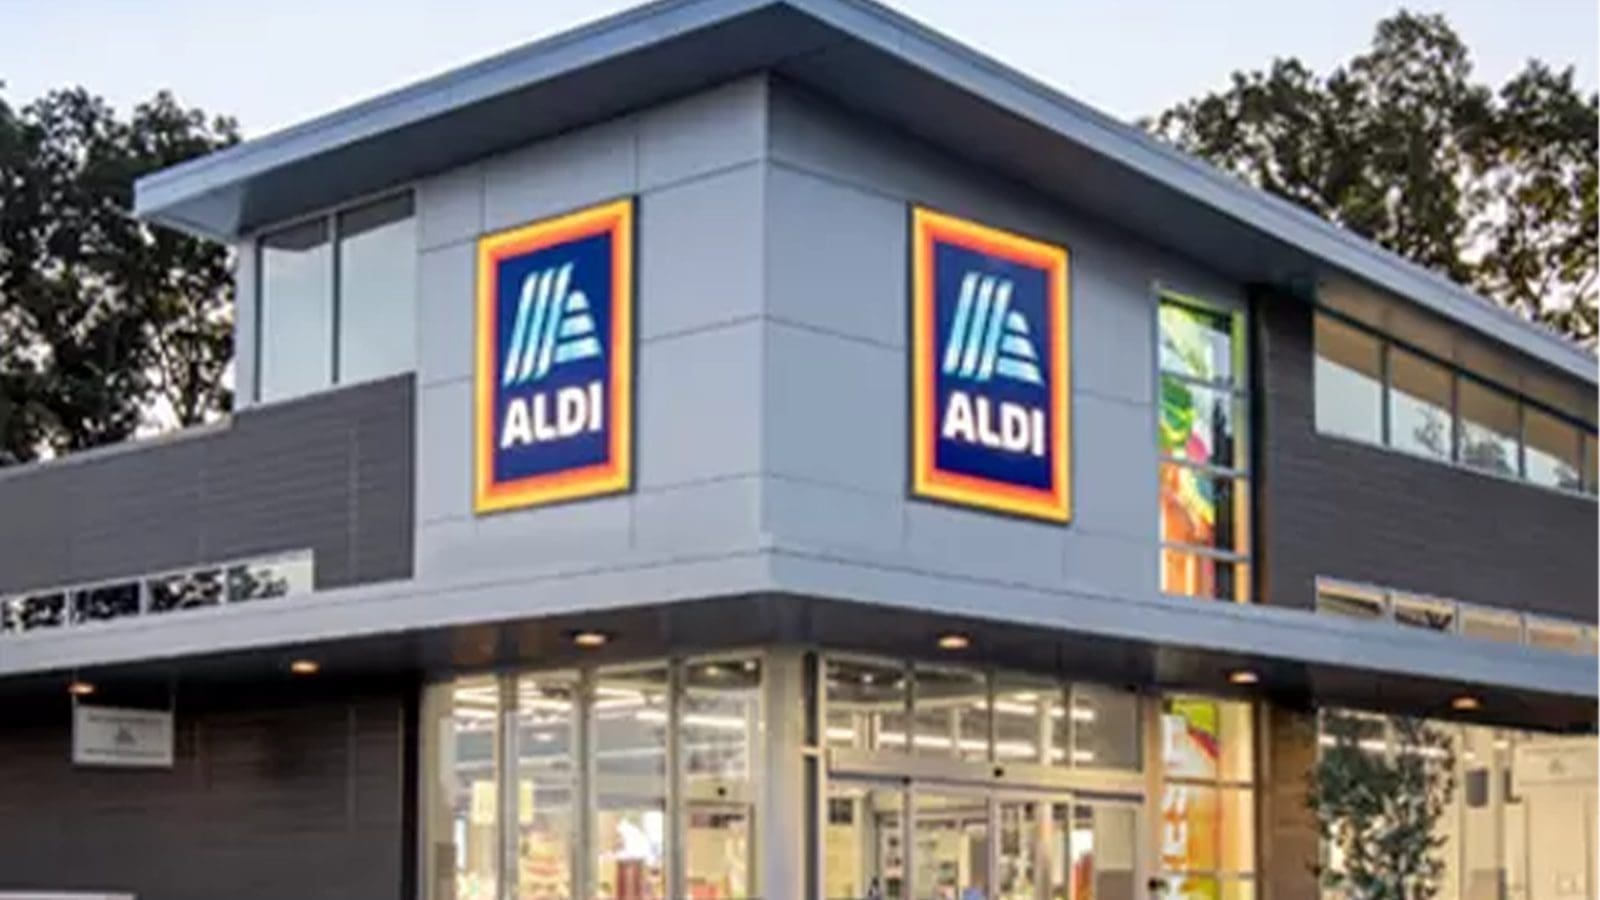 Aldi takes stand against food waste, swaps “Use By” for “Best Before” dates on fresh milk